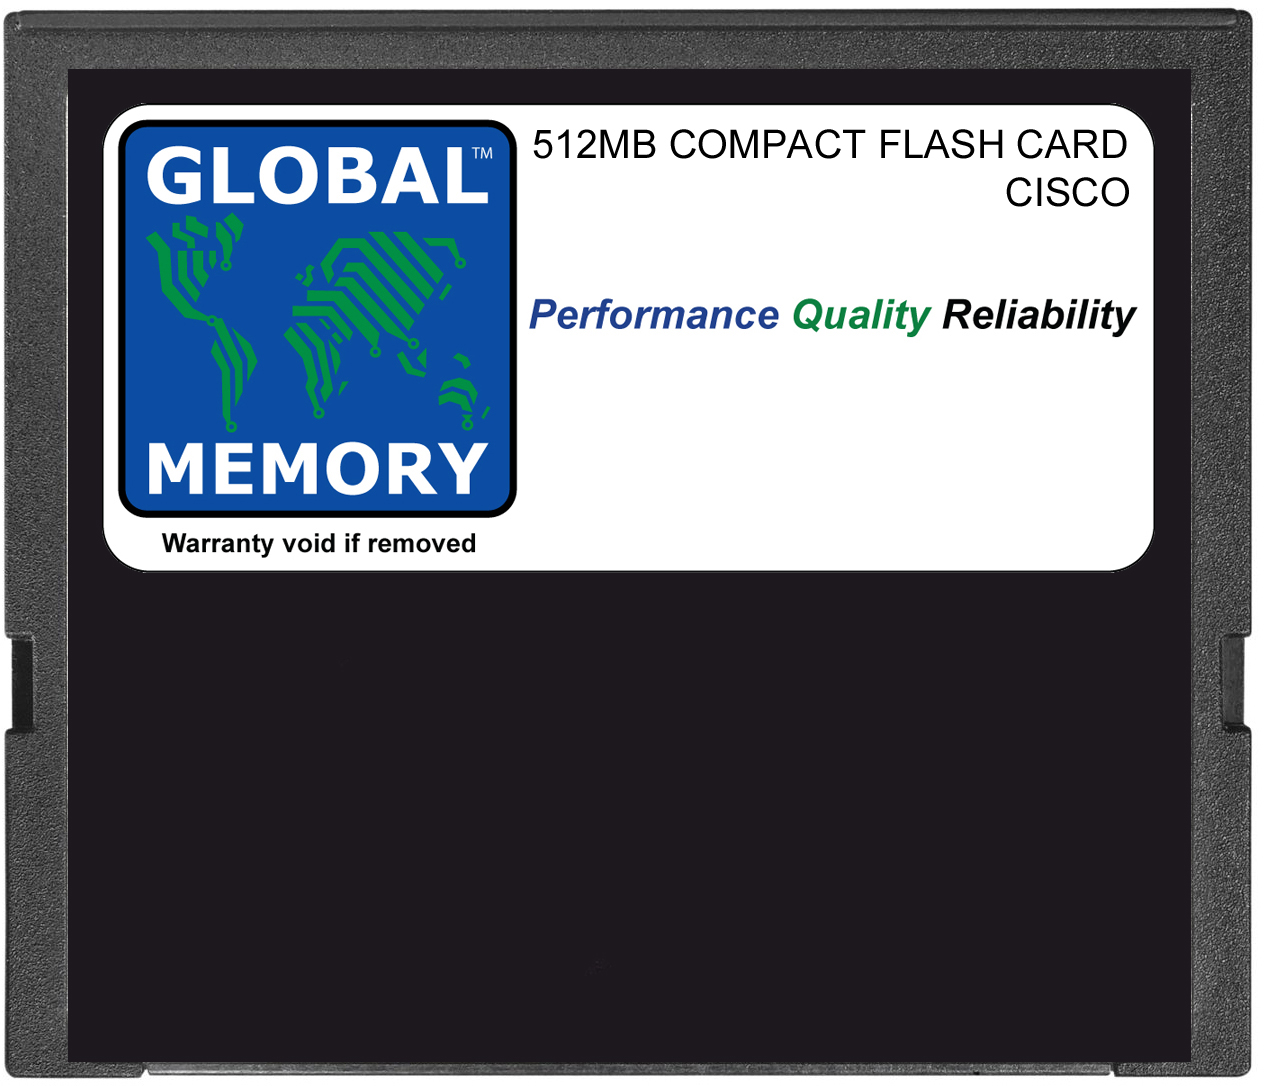 512MB COMPACT FLASH CARD MEMORY FOR CISCO CATALYST 6500 SERIES SWITCHES & 7600 SERIES ROUTERS 720 RSP (MEM-C6K-CPTFL512M)